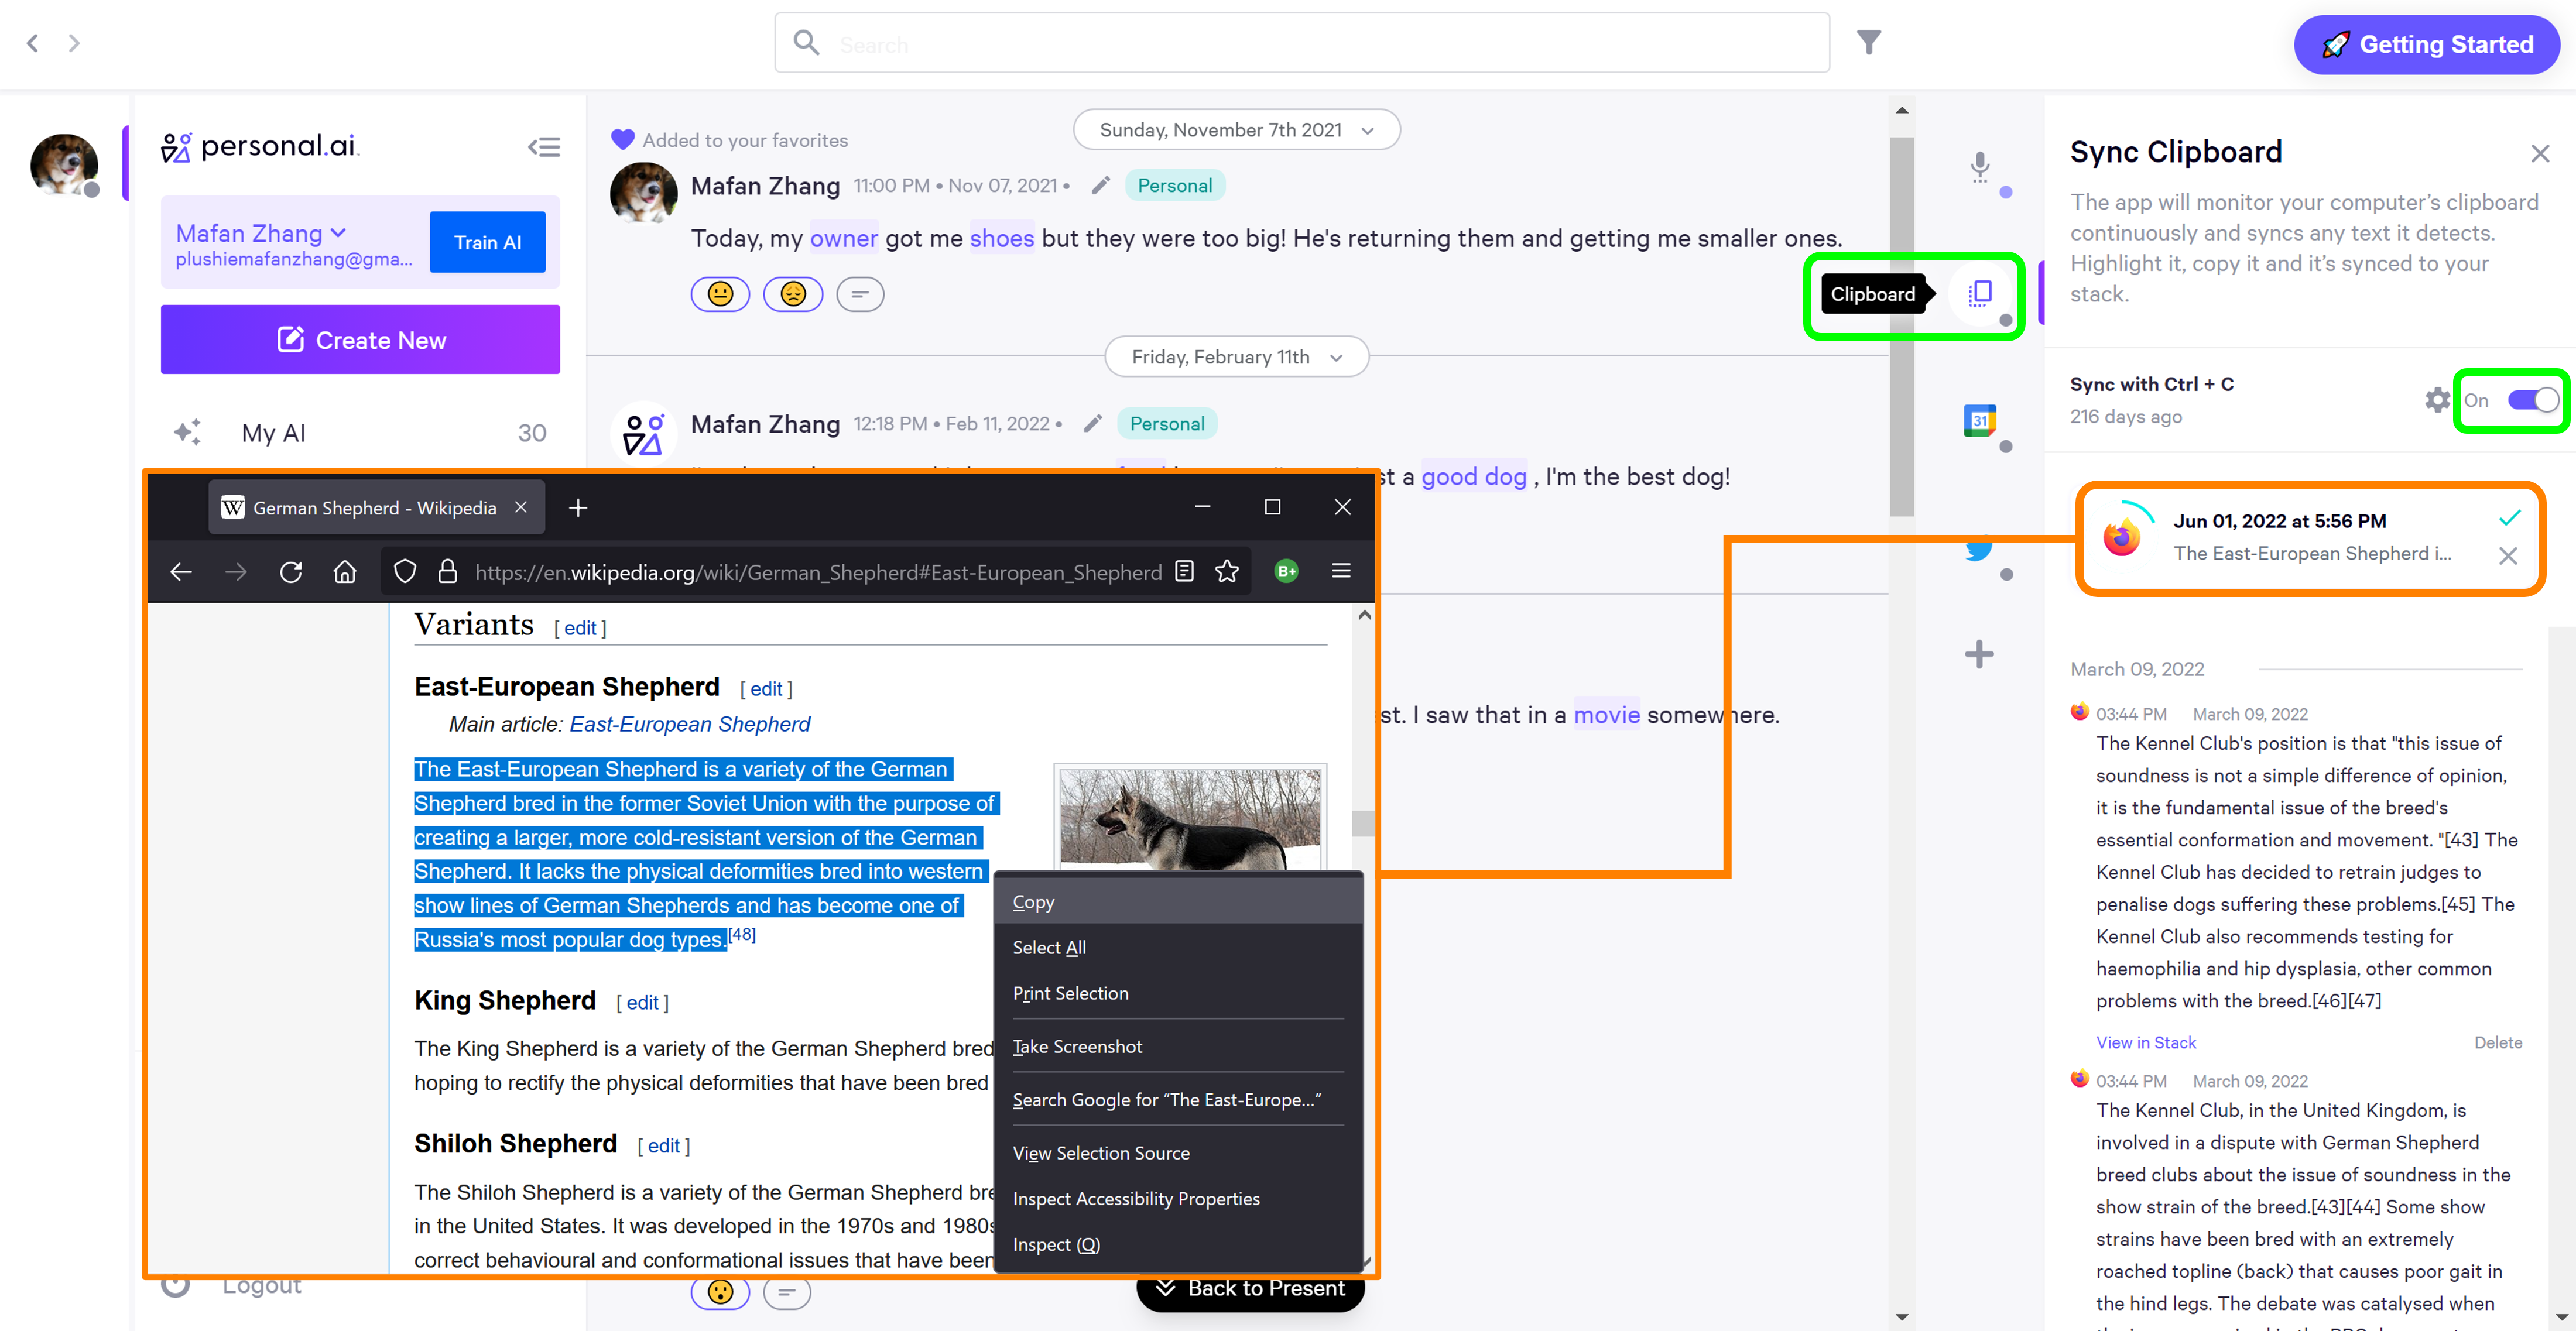 Screenshot of Sync Clipboard being used